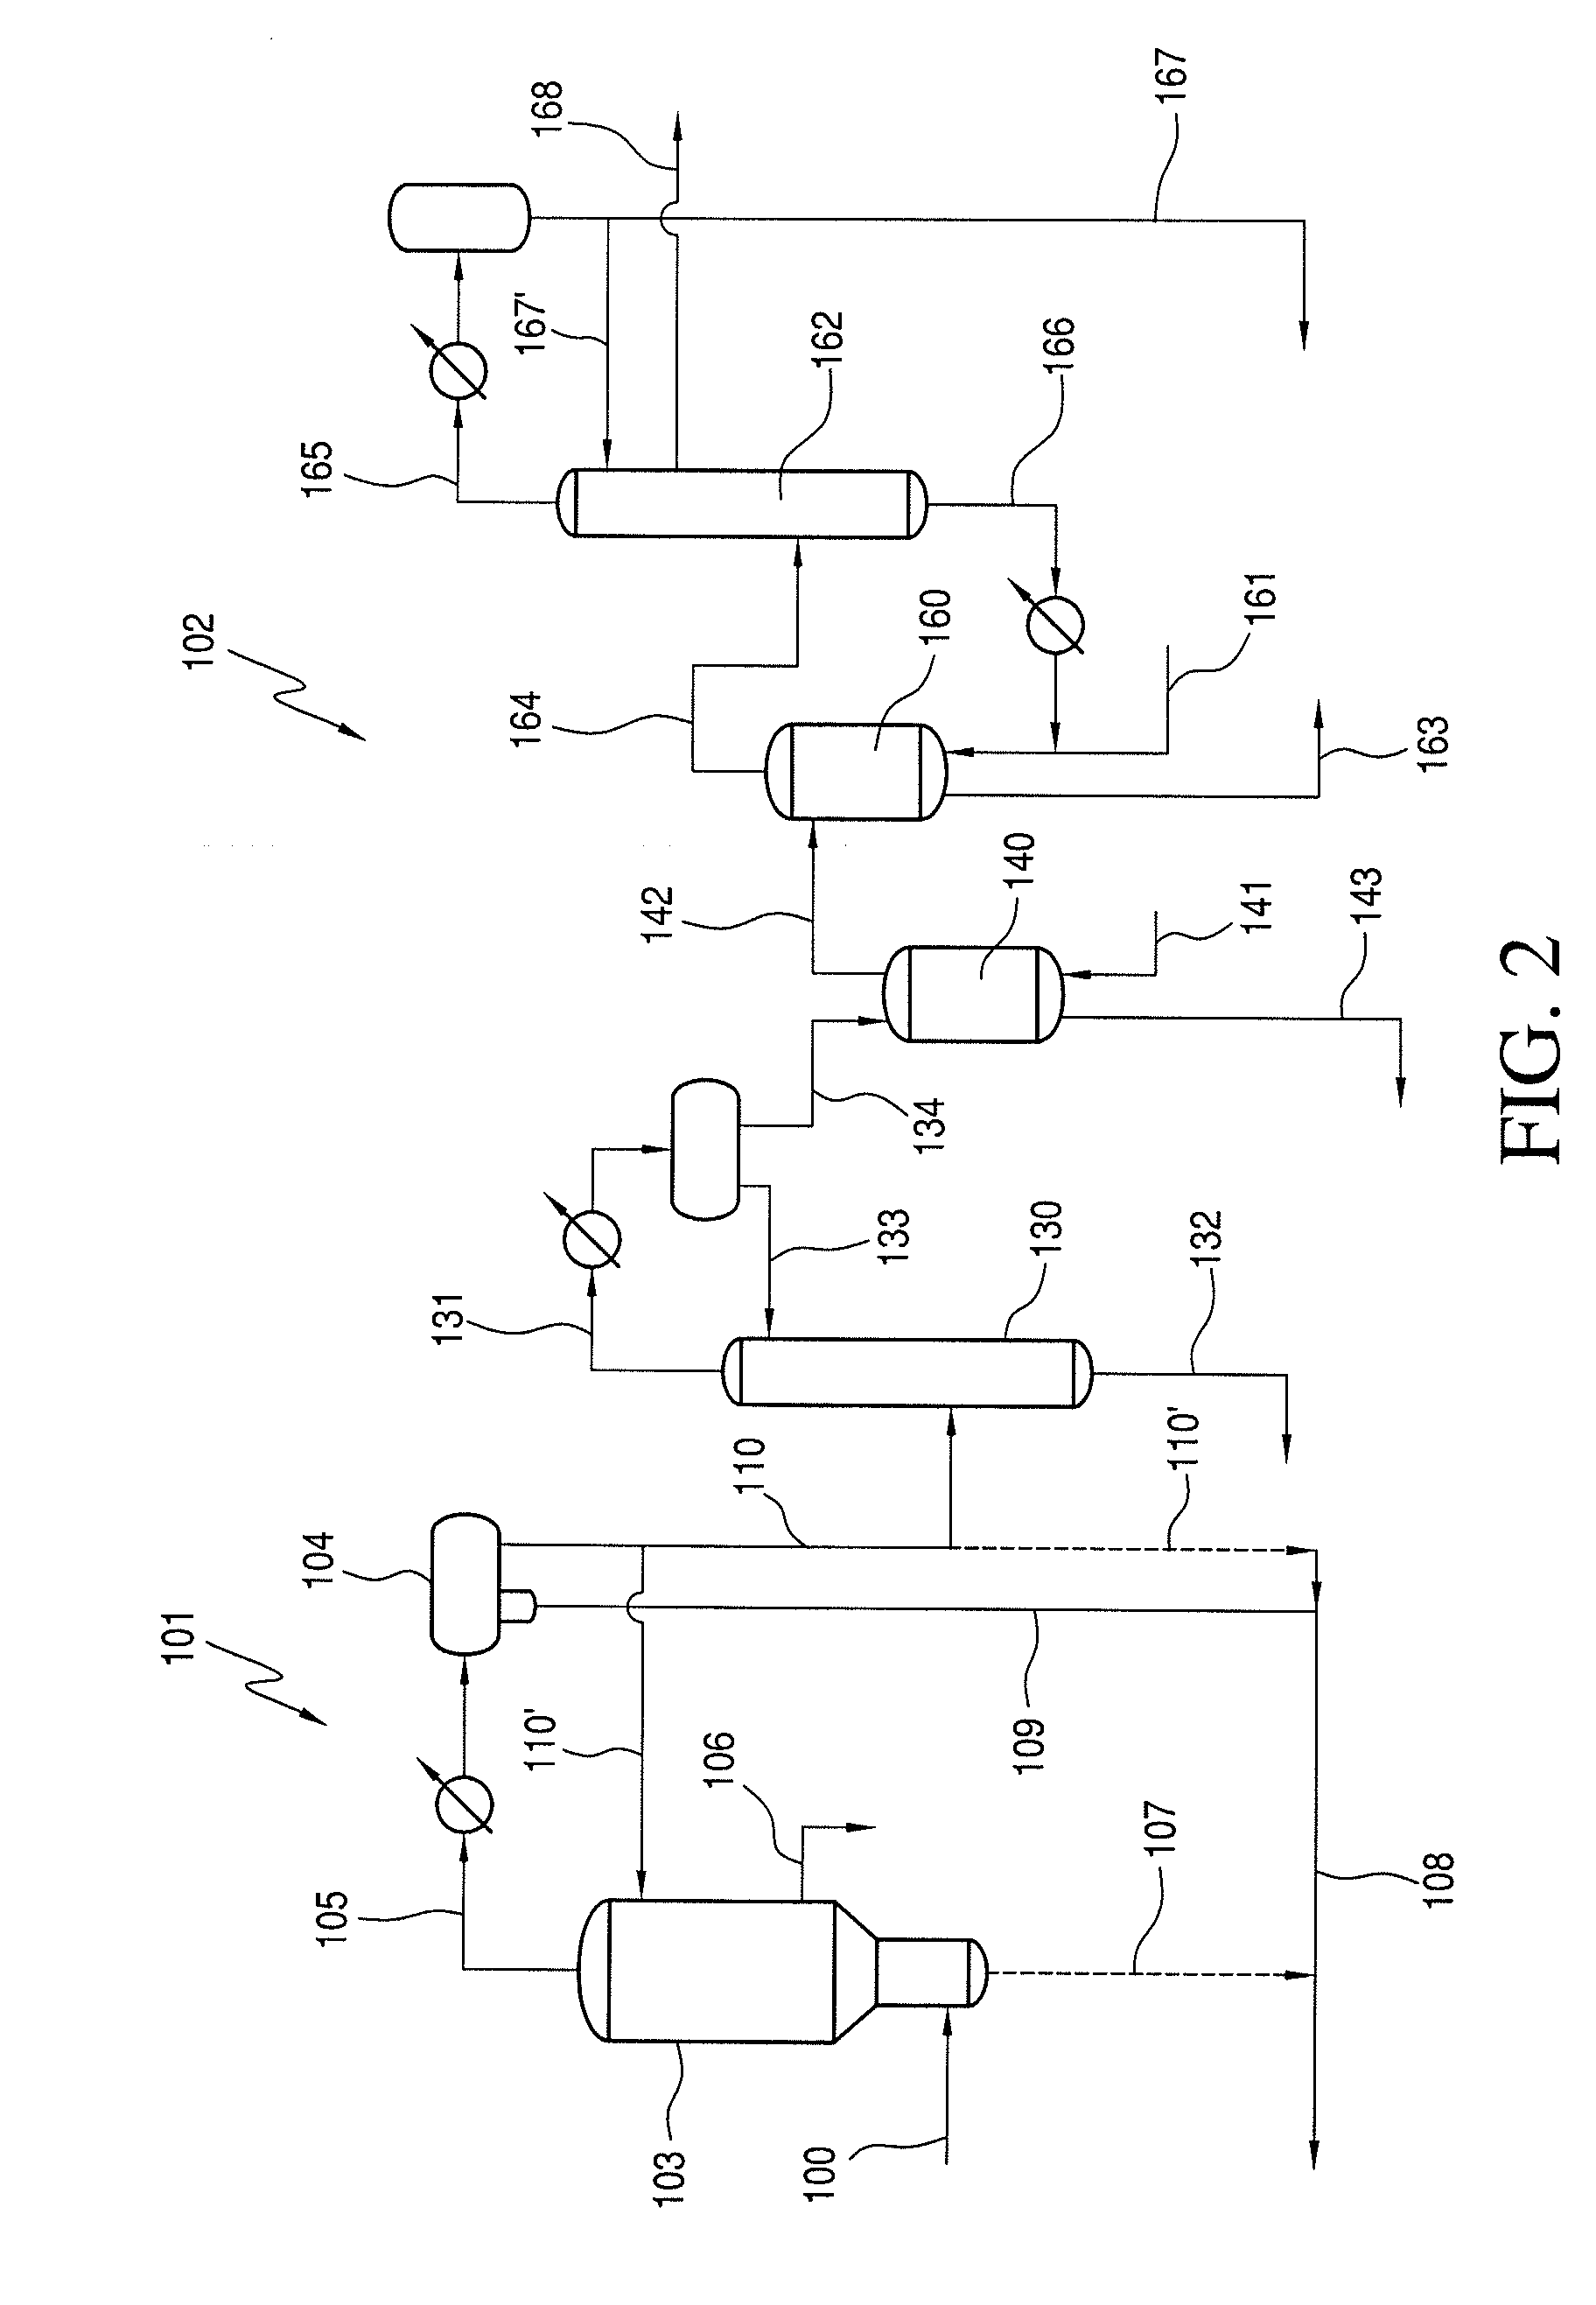 Process for Recovering Halogen Promoters and Removing Permanganate Reducing Compounds